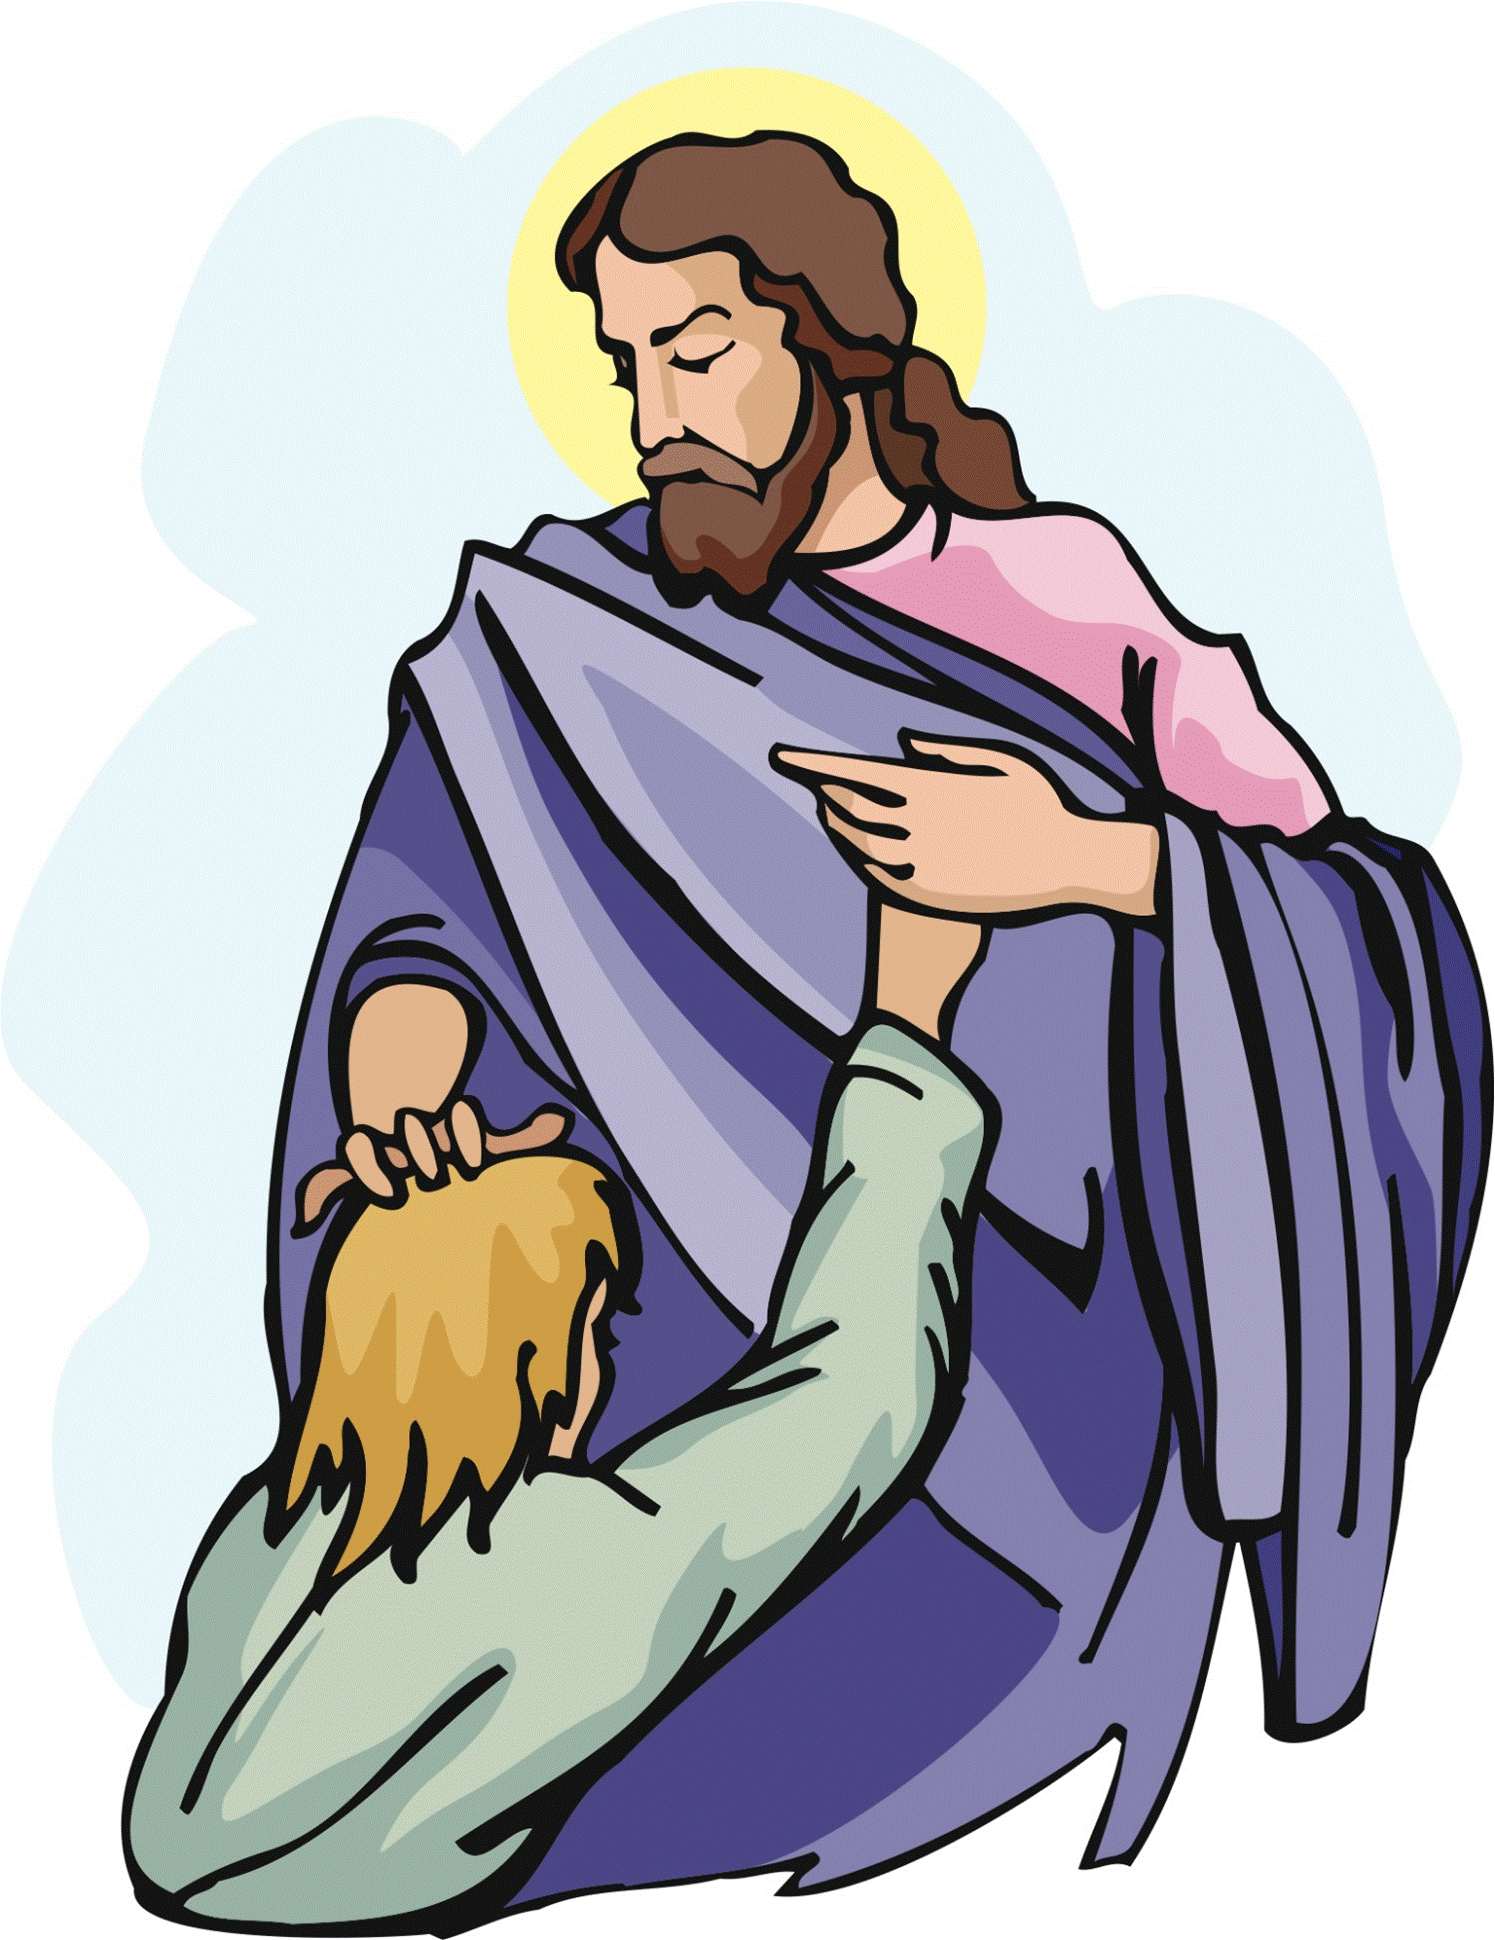 free christian clipart of jesus - photo #46